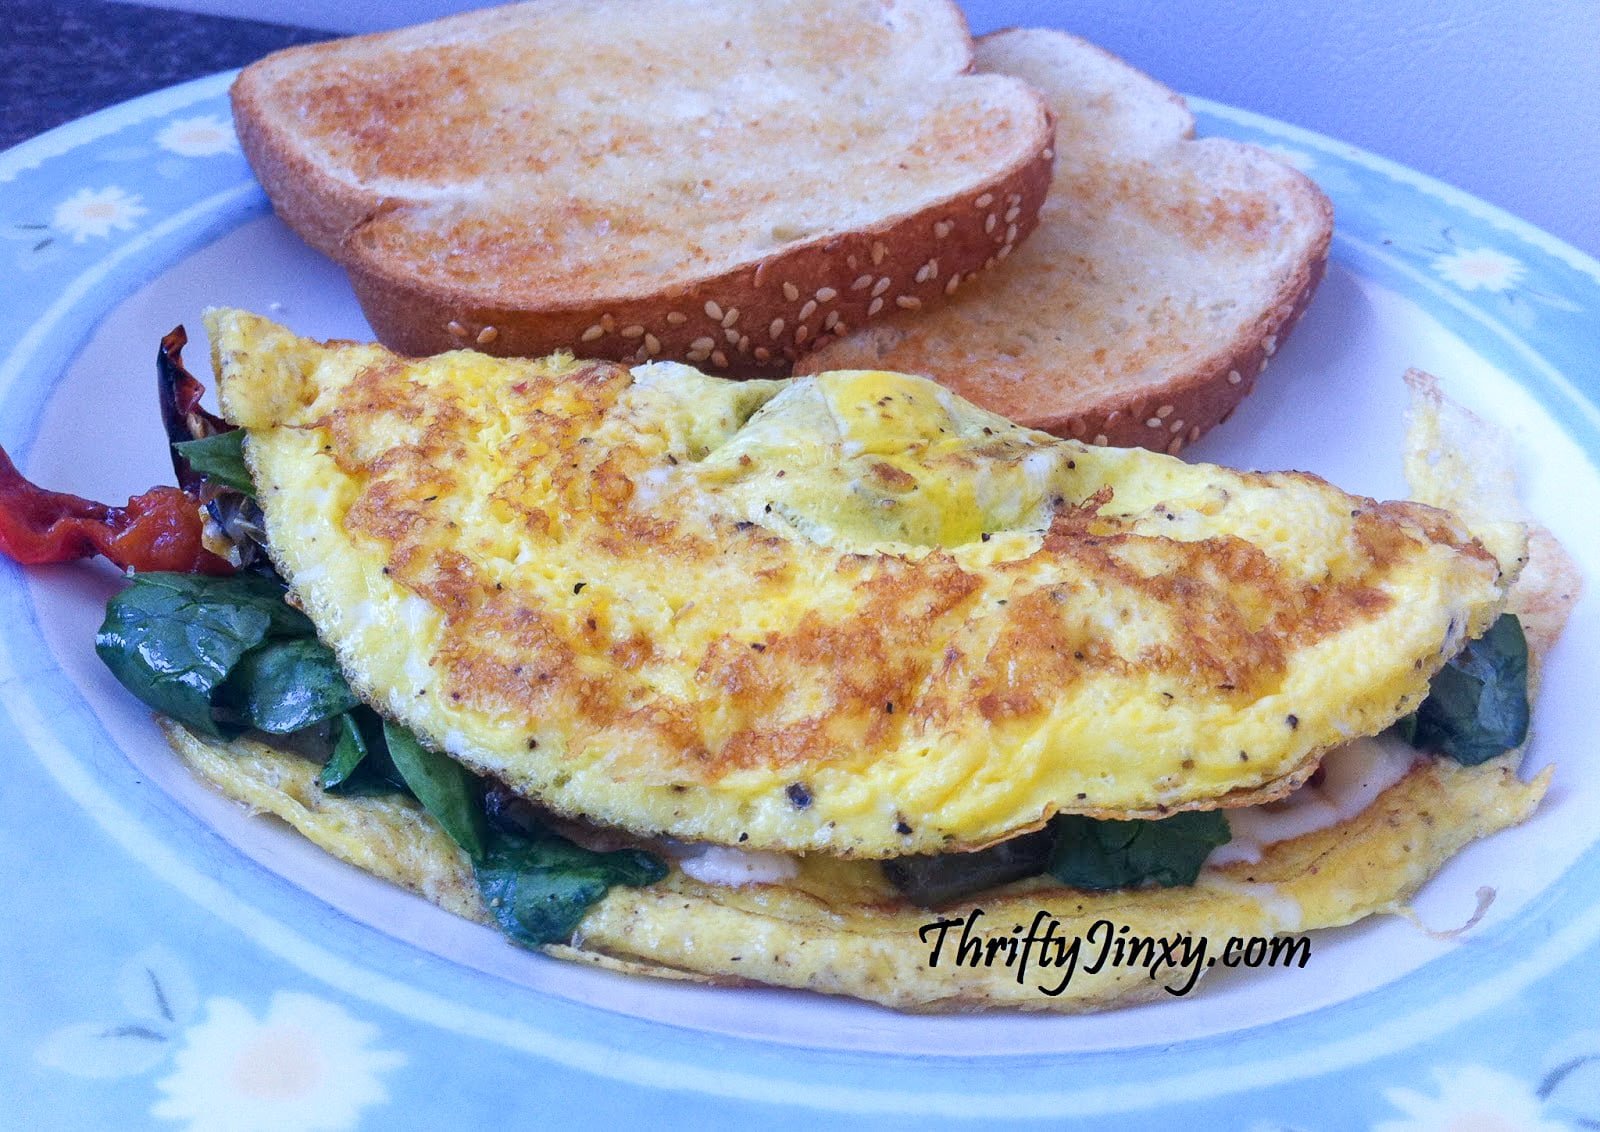 Greek Omelet with Spinach and Feta Cheese